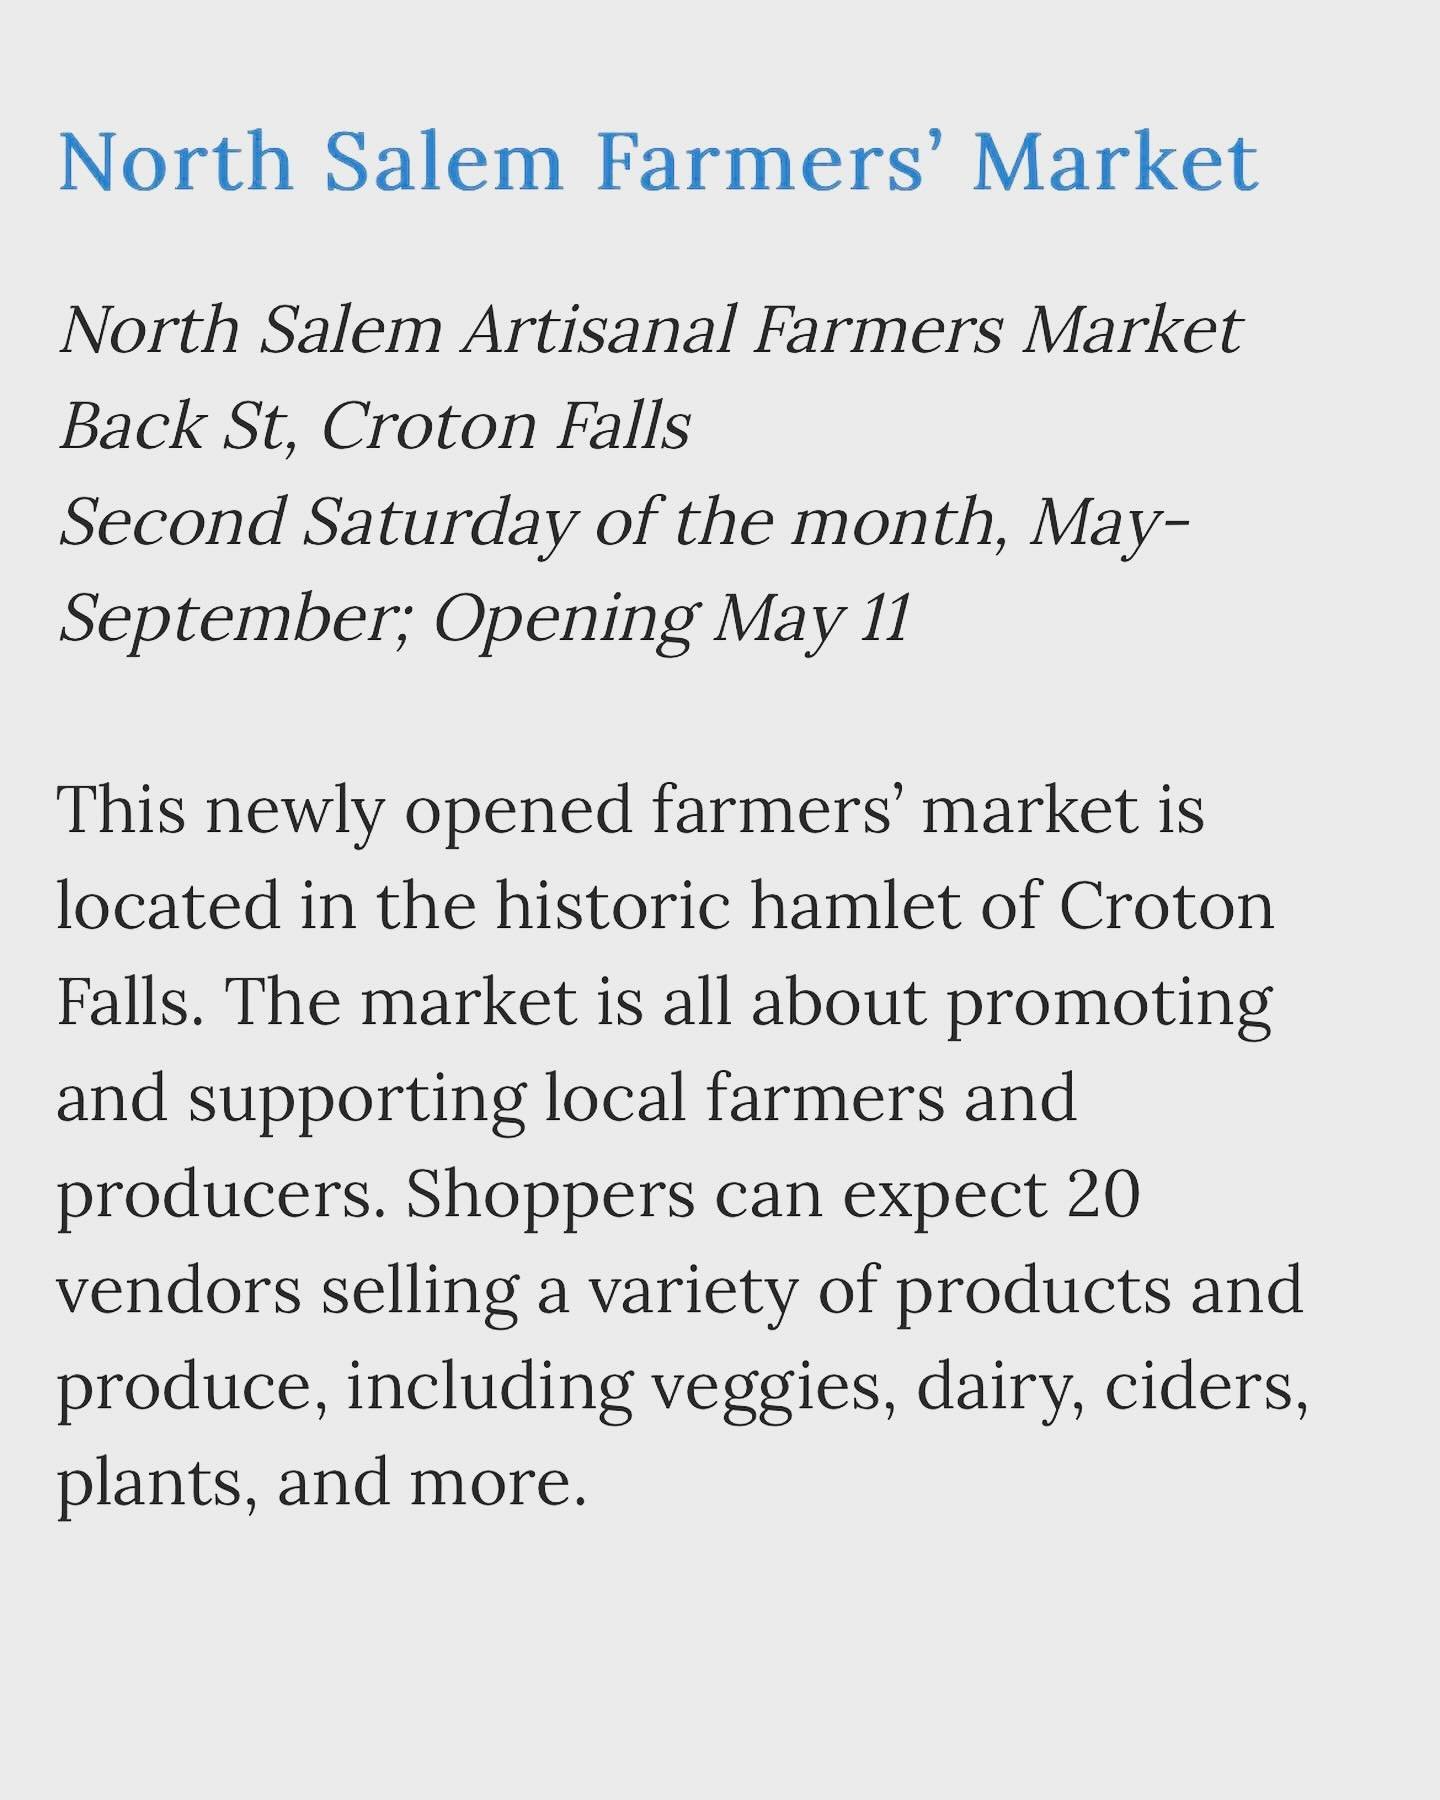 Thank you @westchestermagazine for including us in your farmers market roundup with such great company &mdash; we are so excited to kick off Saturday 5/11 and be together in community supporting our local farmers and makers on the second Saturdays of